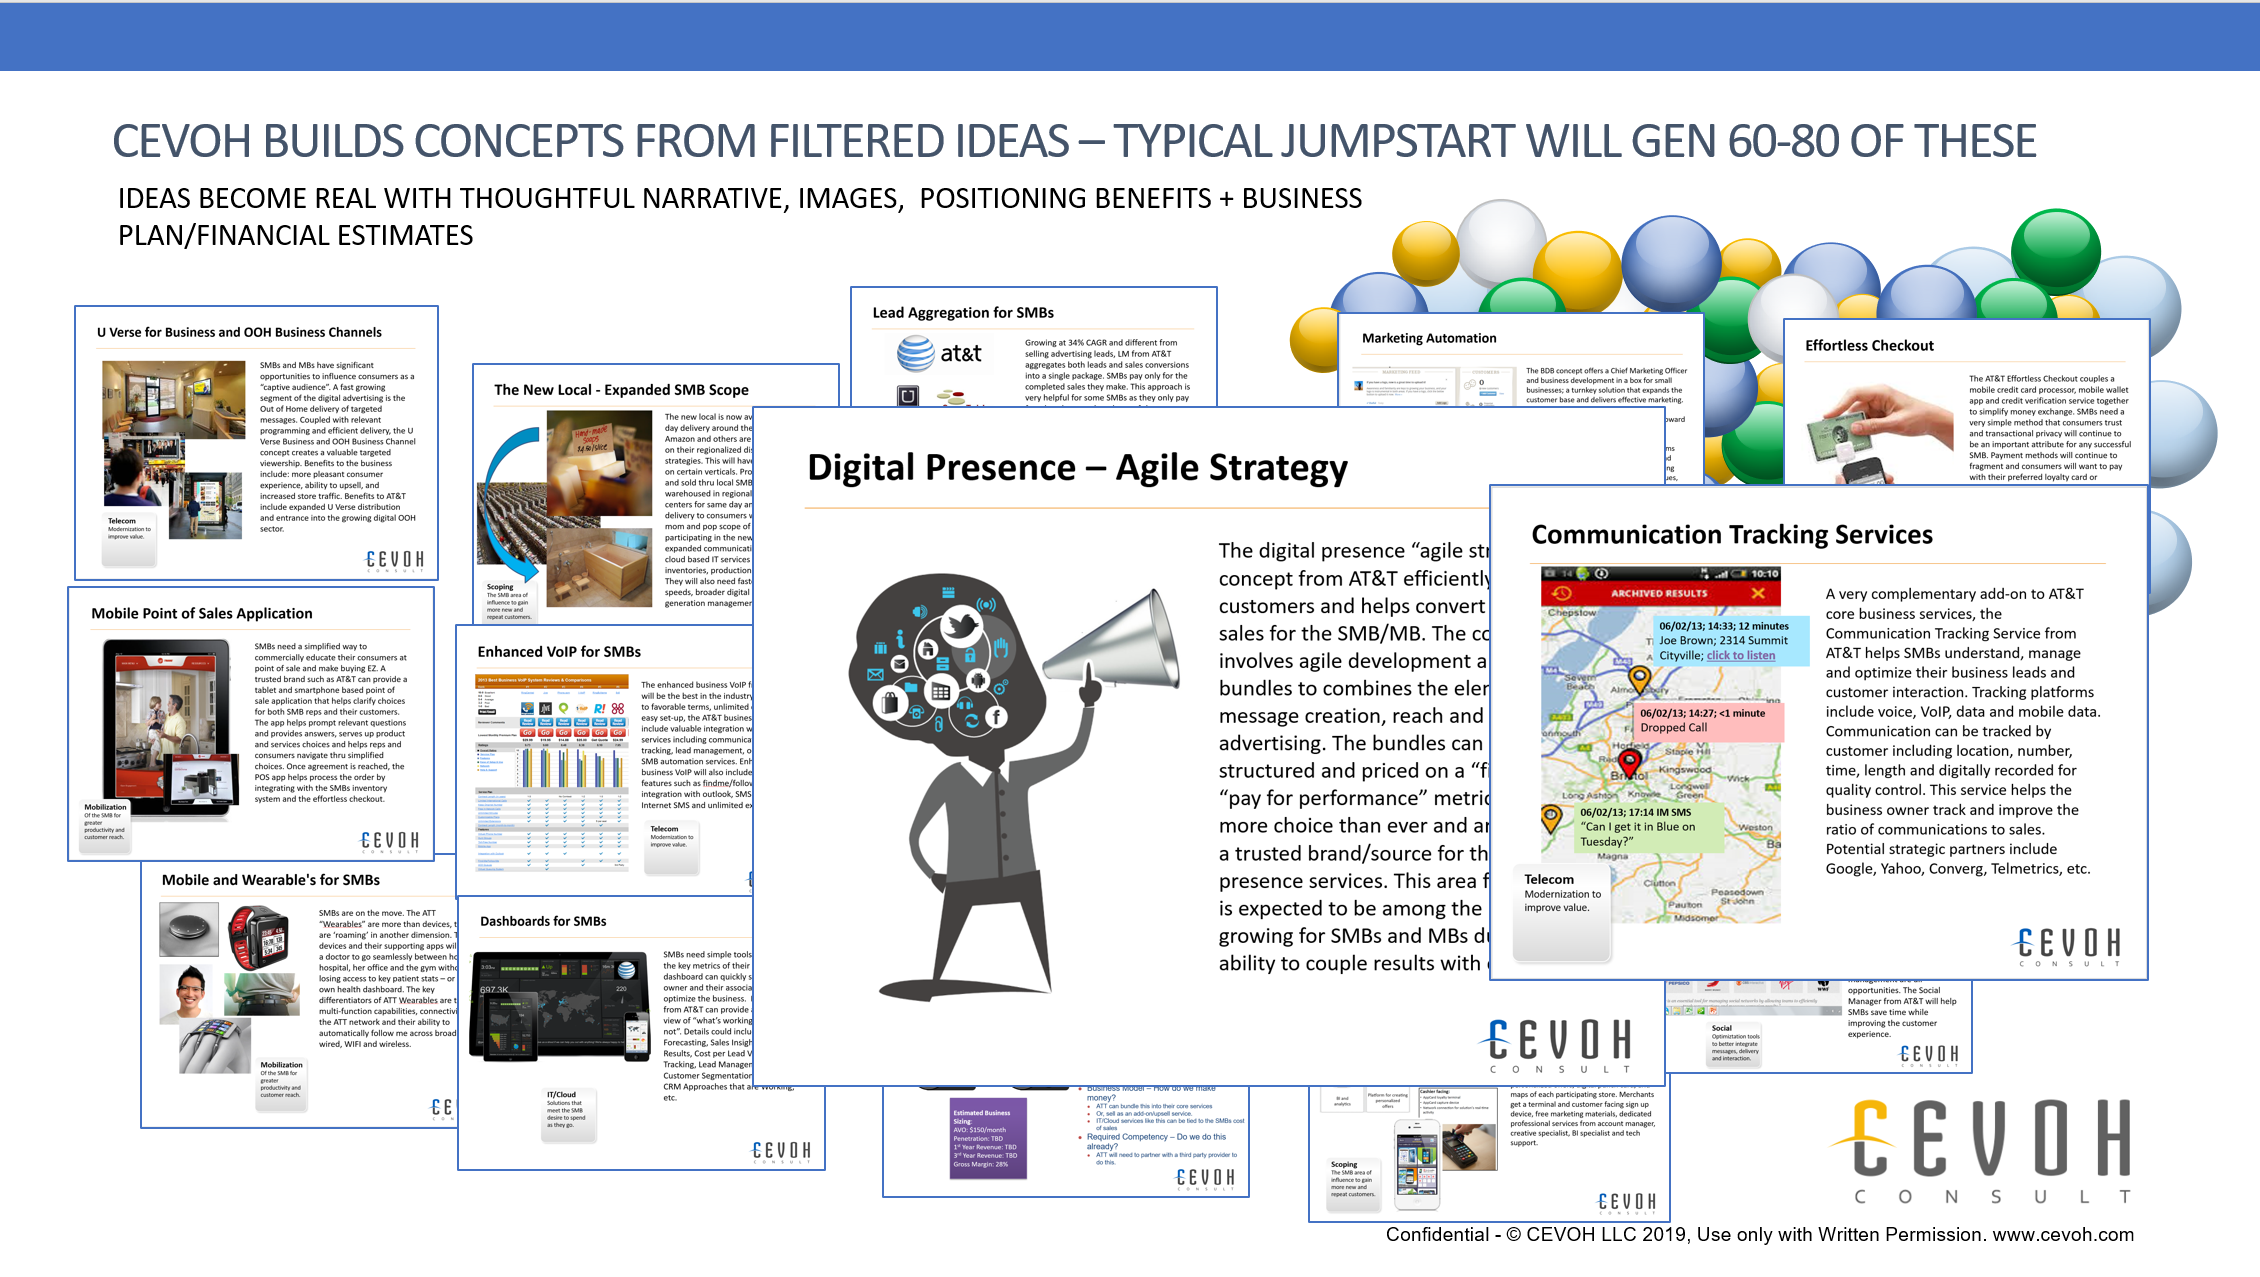 CEVOH_INNOVATION_JUMPSTARTS_builds_concepts_from_ideas.png